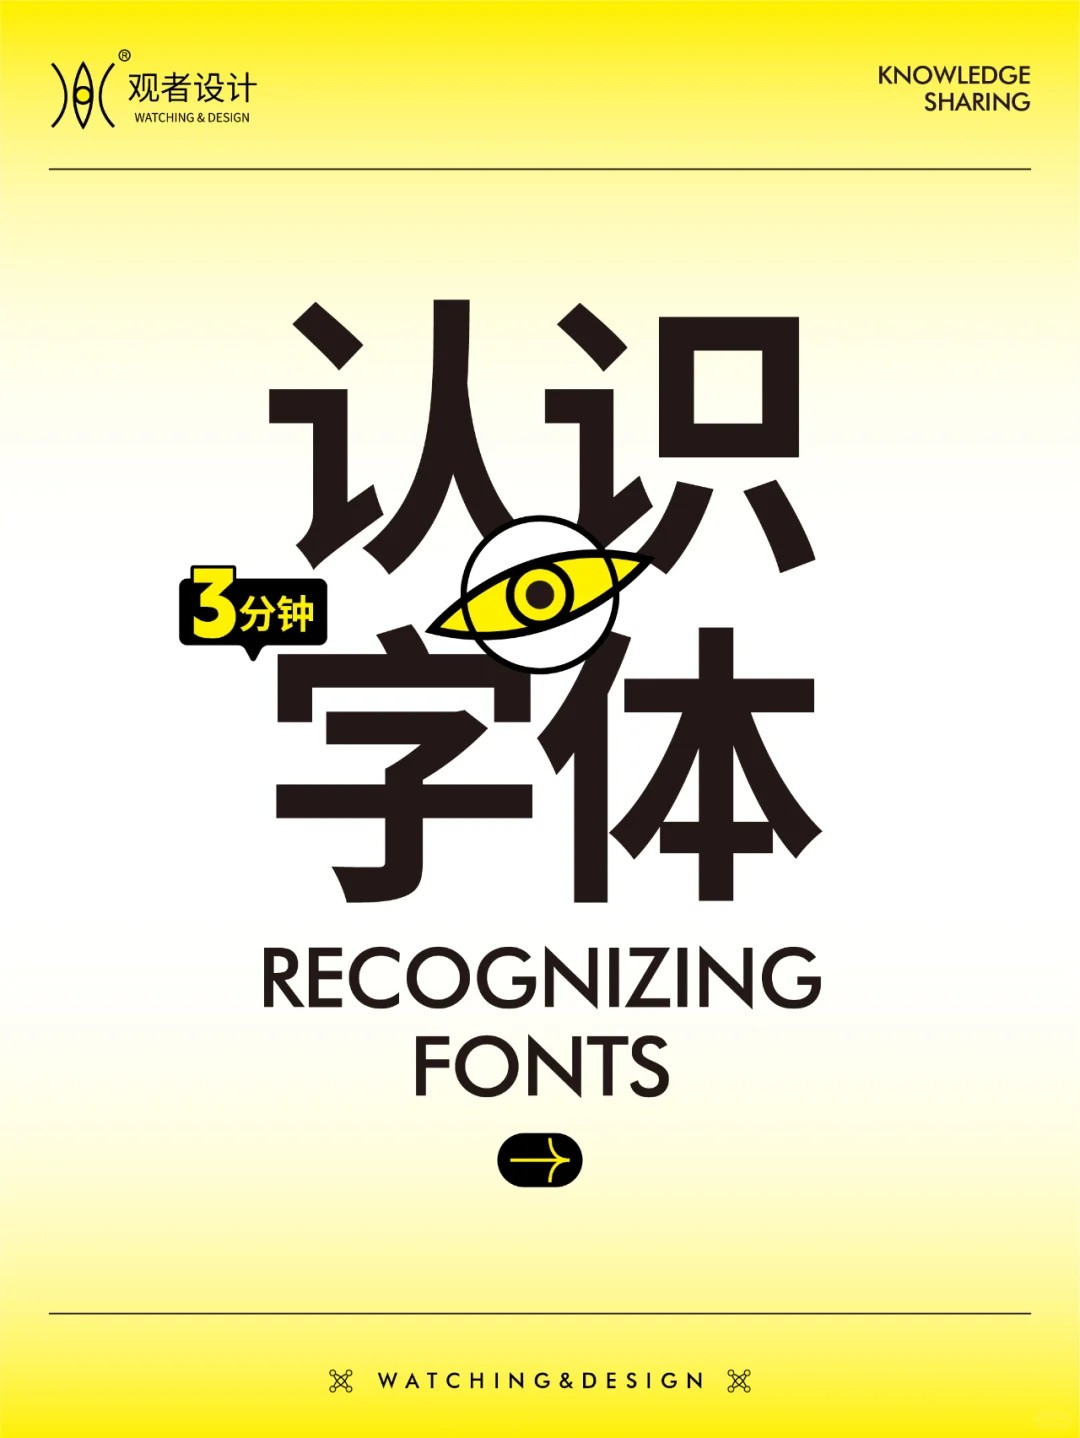  3 minutes to recognize fonts